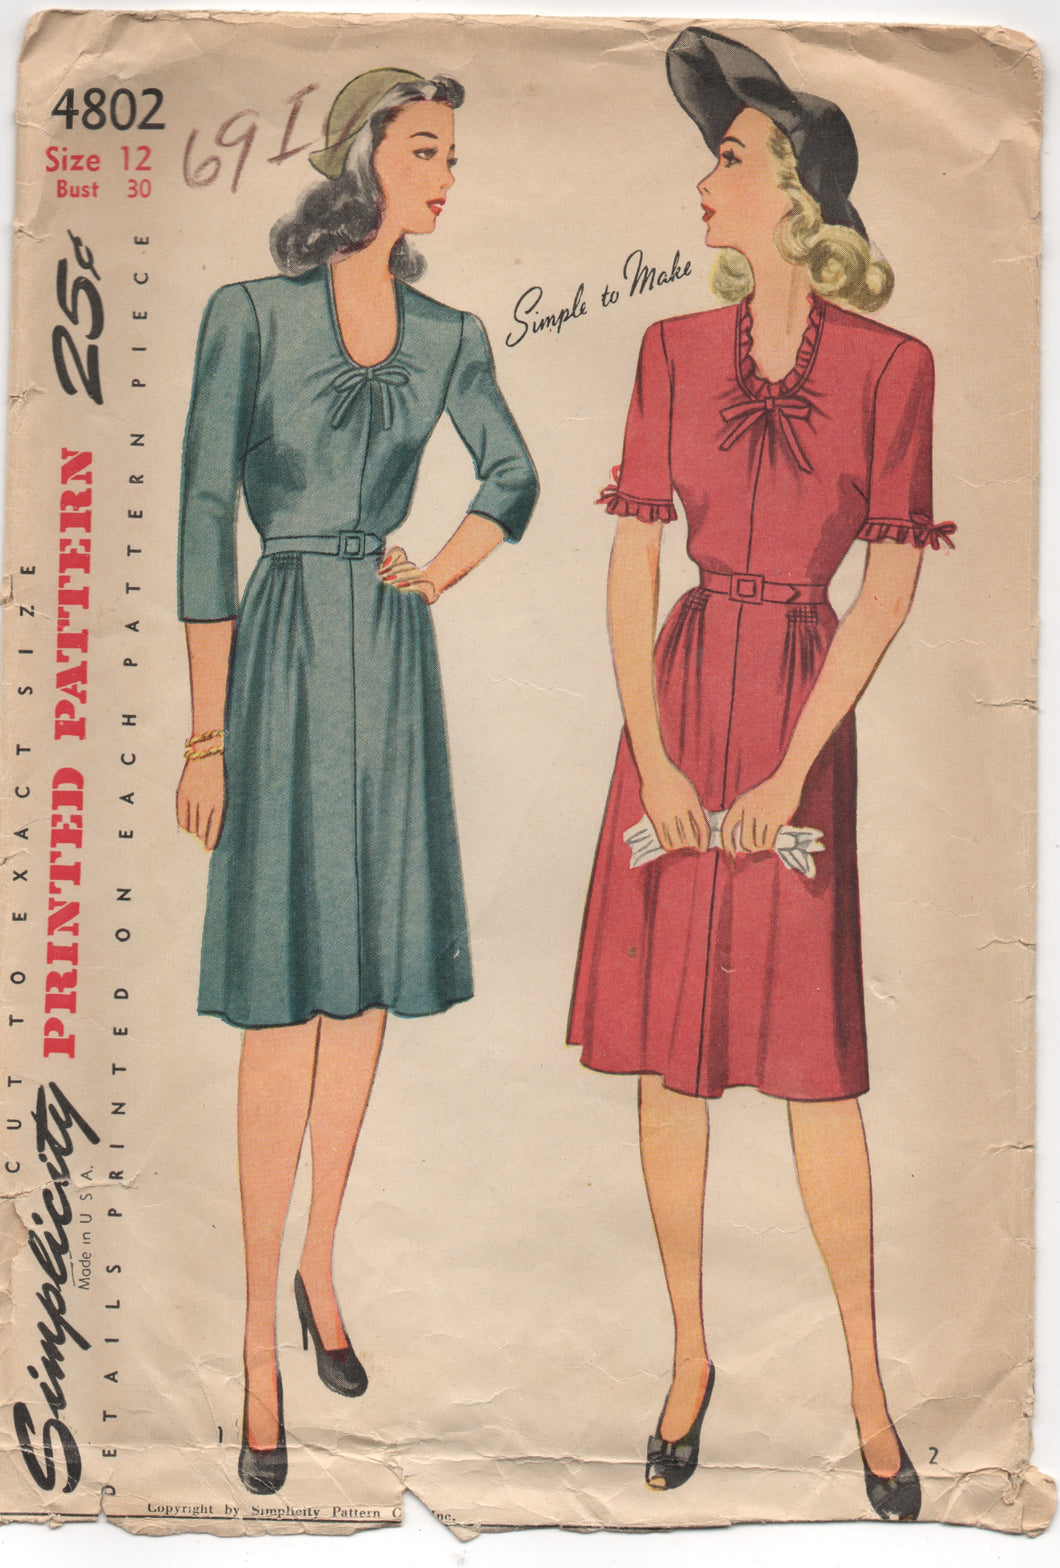 1940's Simplicity One Piece Day Dress with Scoop Neckline - Bust 30